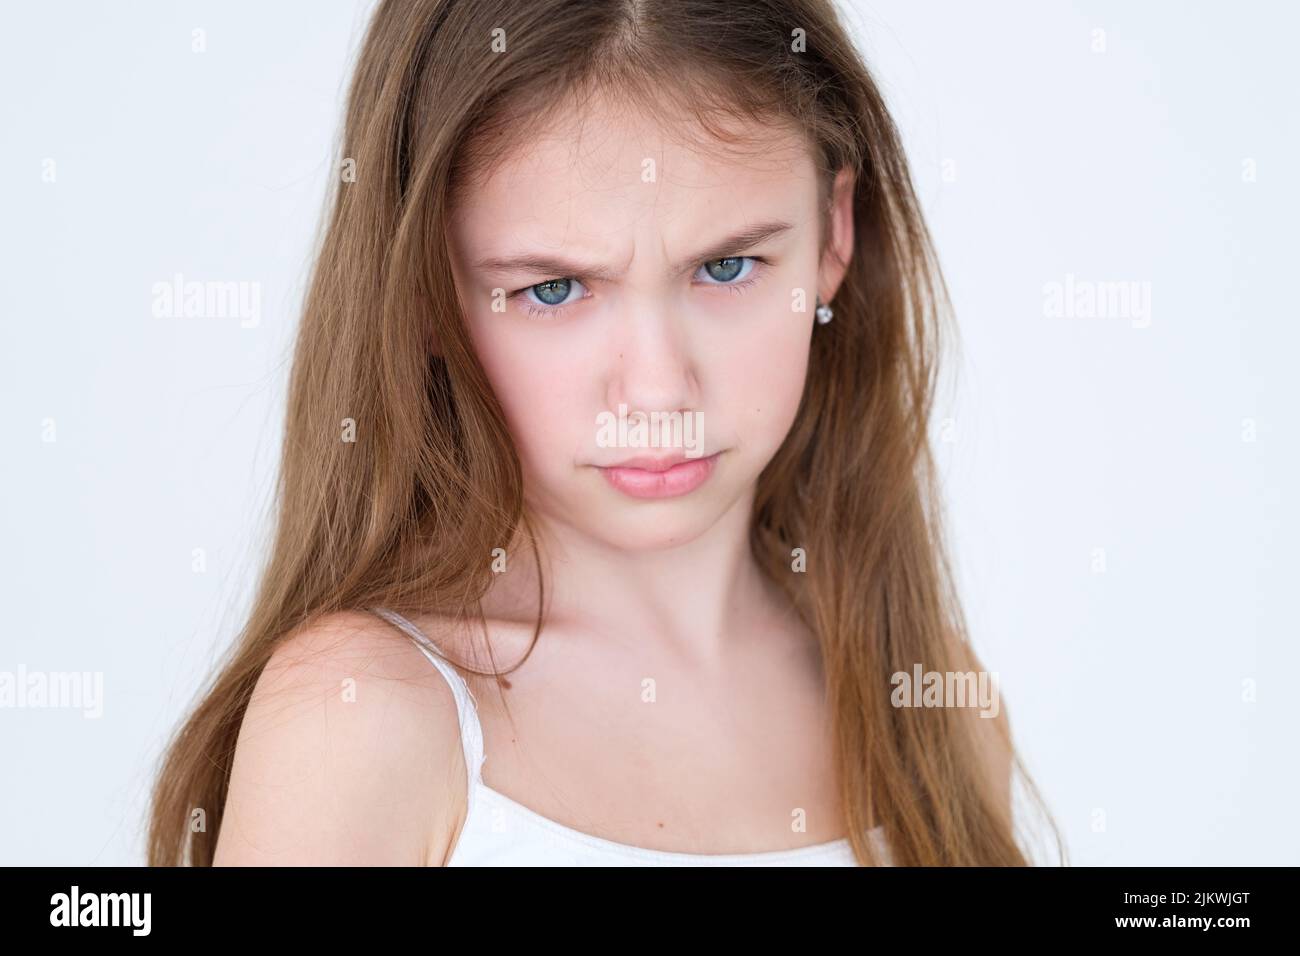 emotion grumpy unhappy discontent frowning child Stock Photo